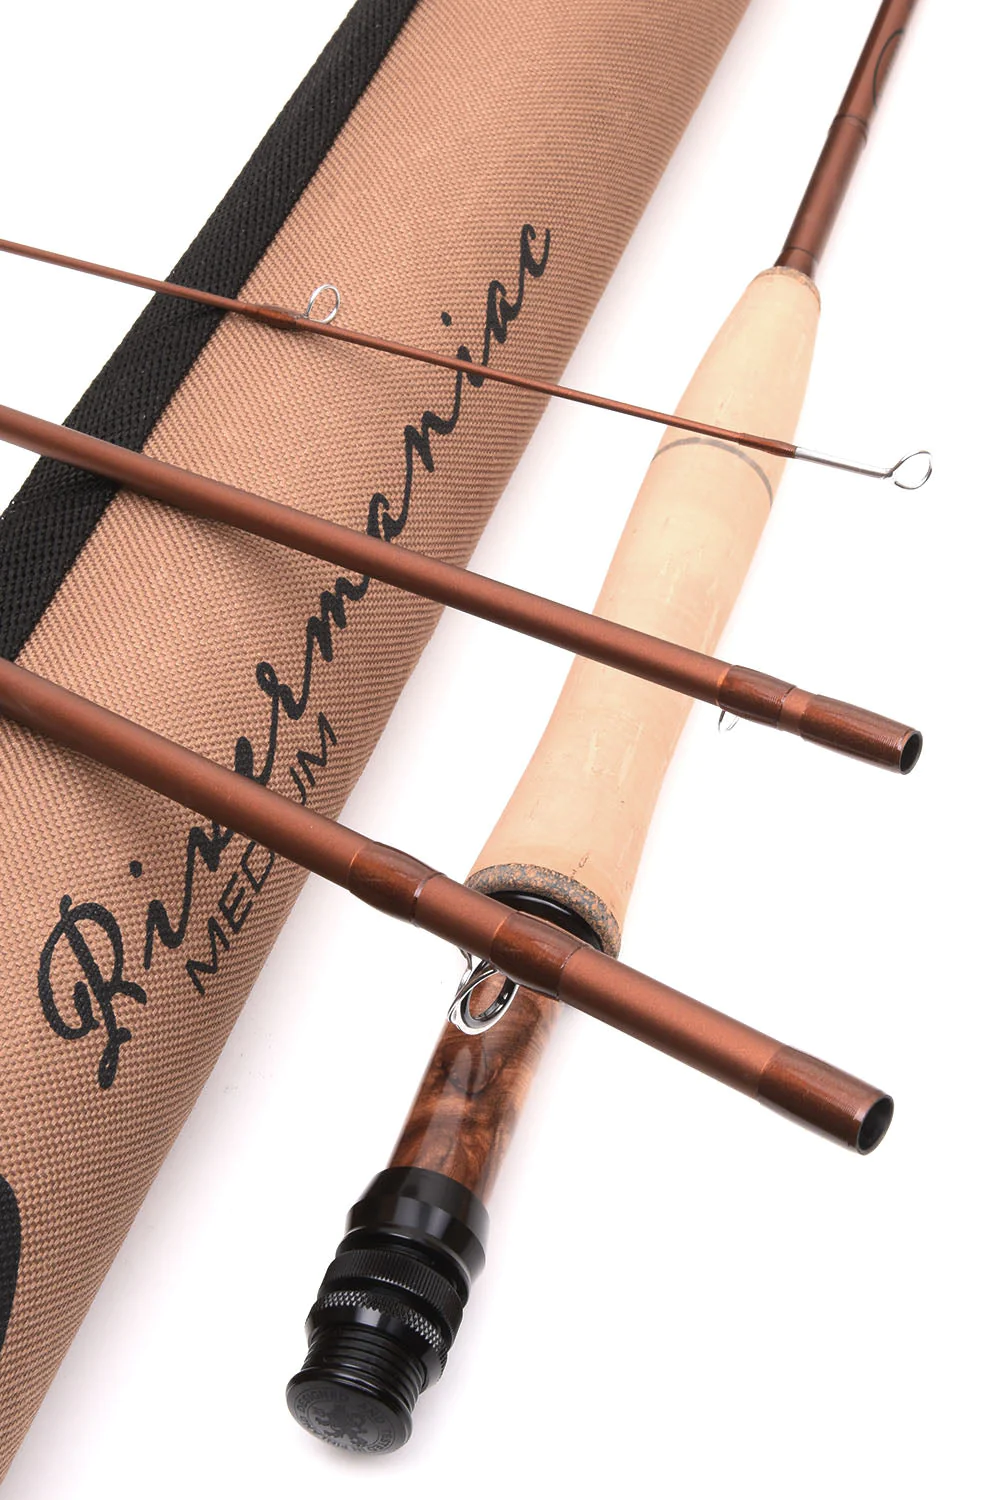 Vision Nymphmaniac Fly Rod, Reel & Line Combo - 9'6 #3